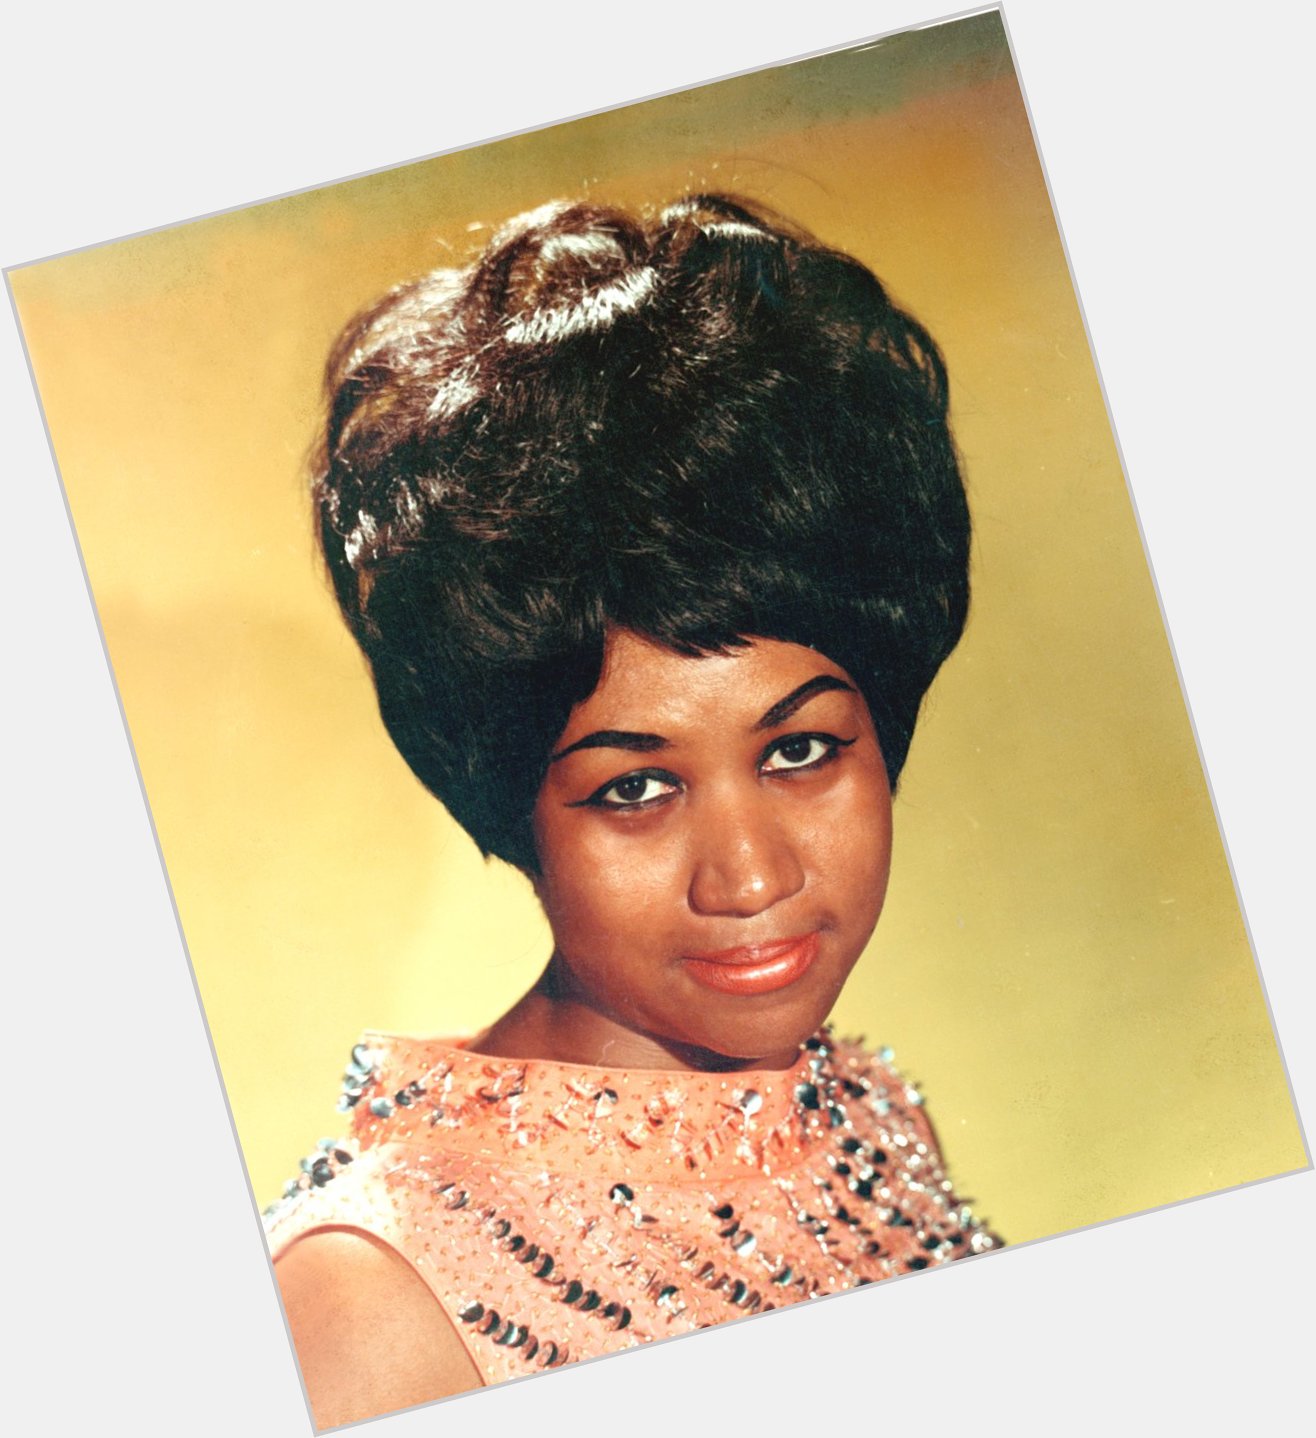 Happy Heavenly Birthday to the Queen of Soul, Aretha Franklin!  